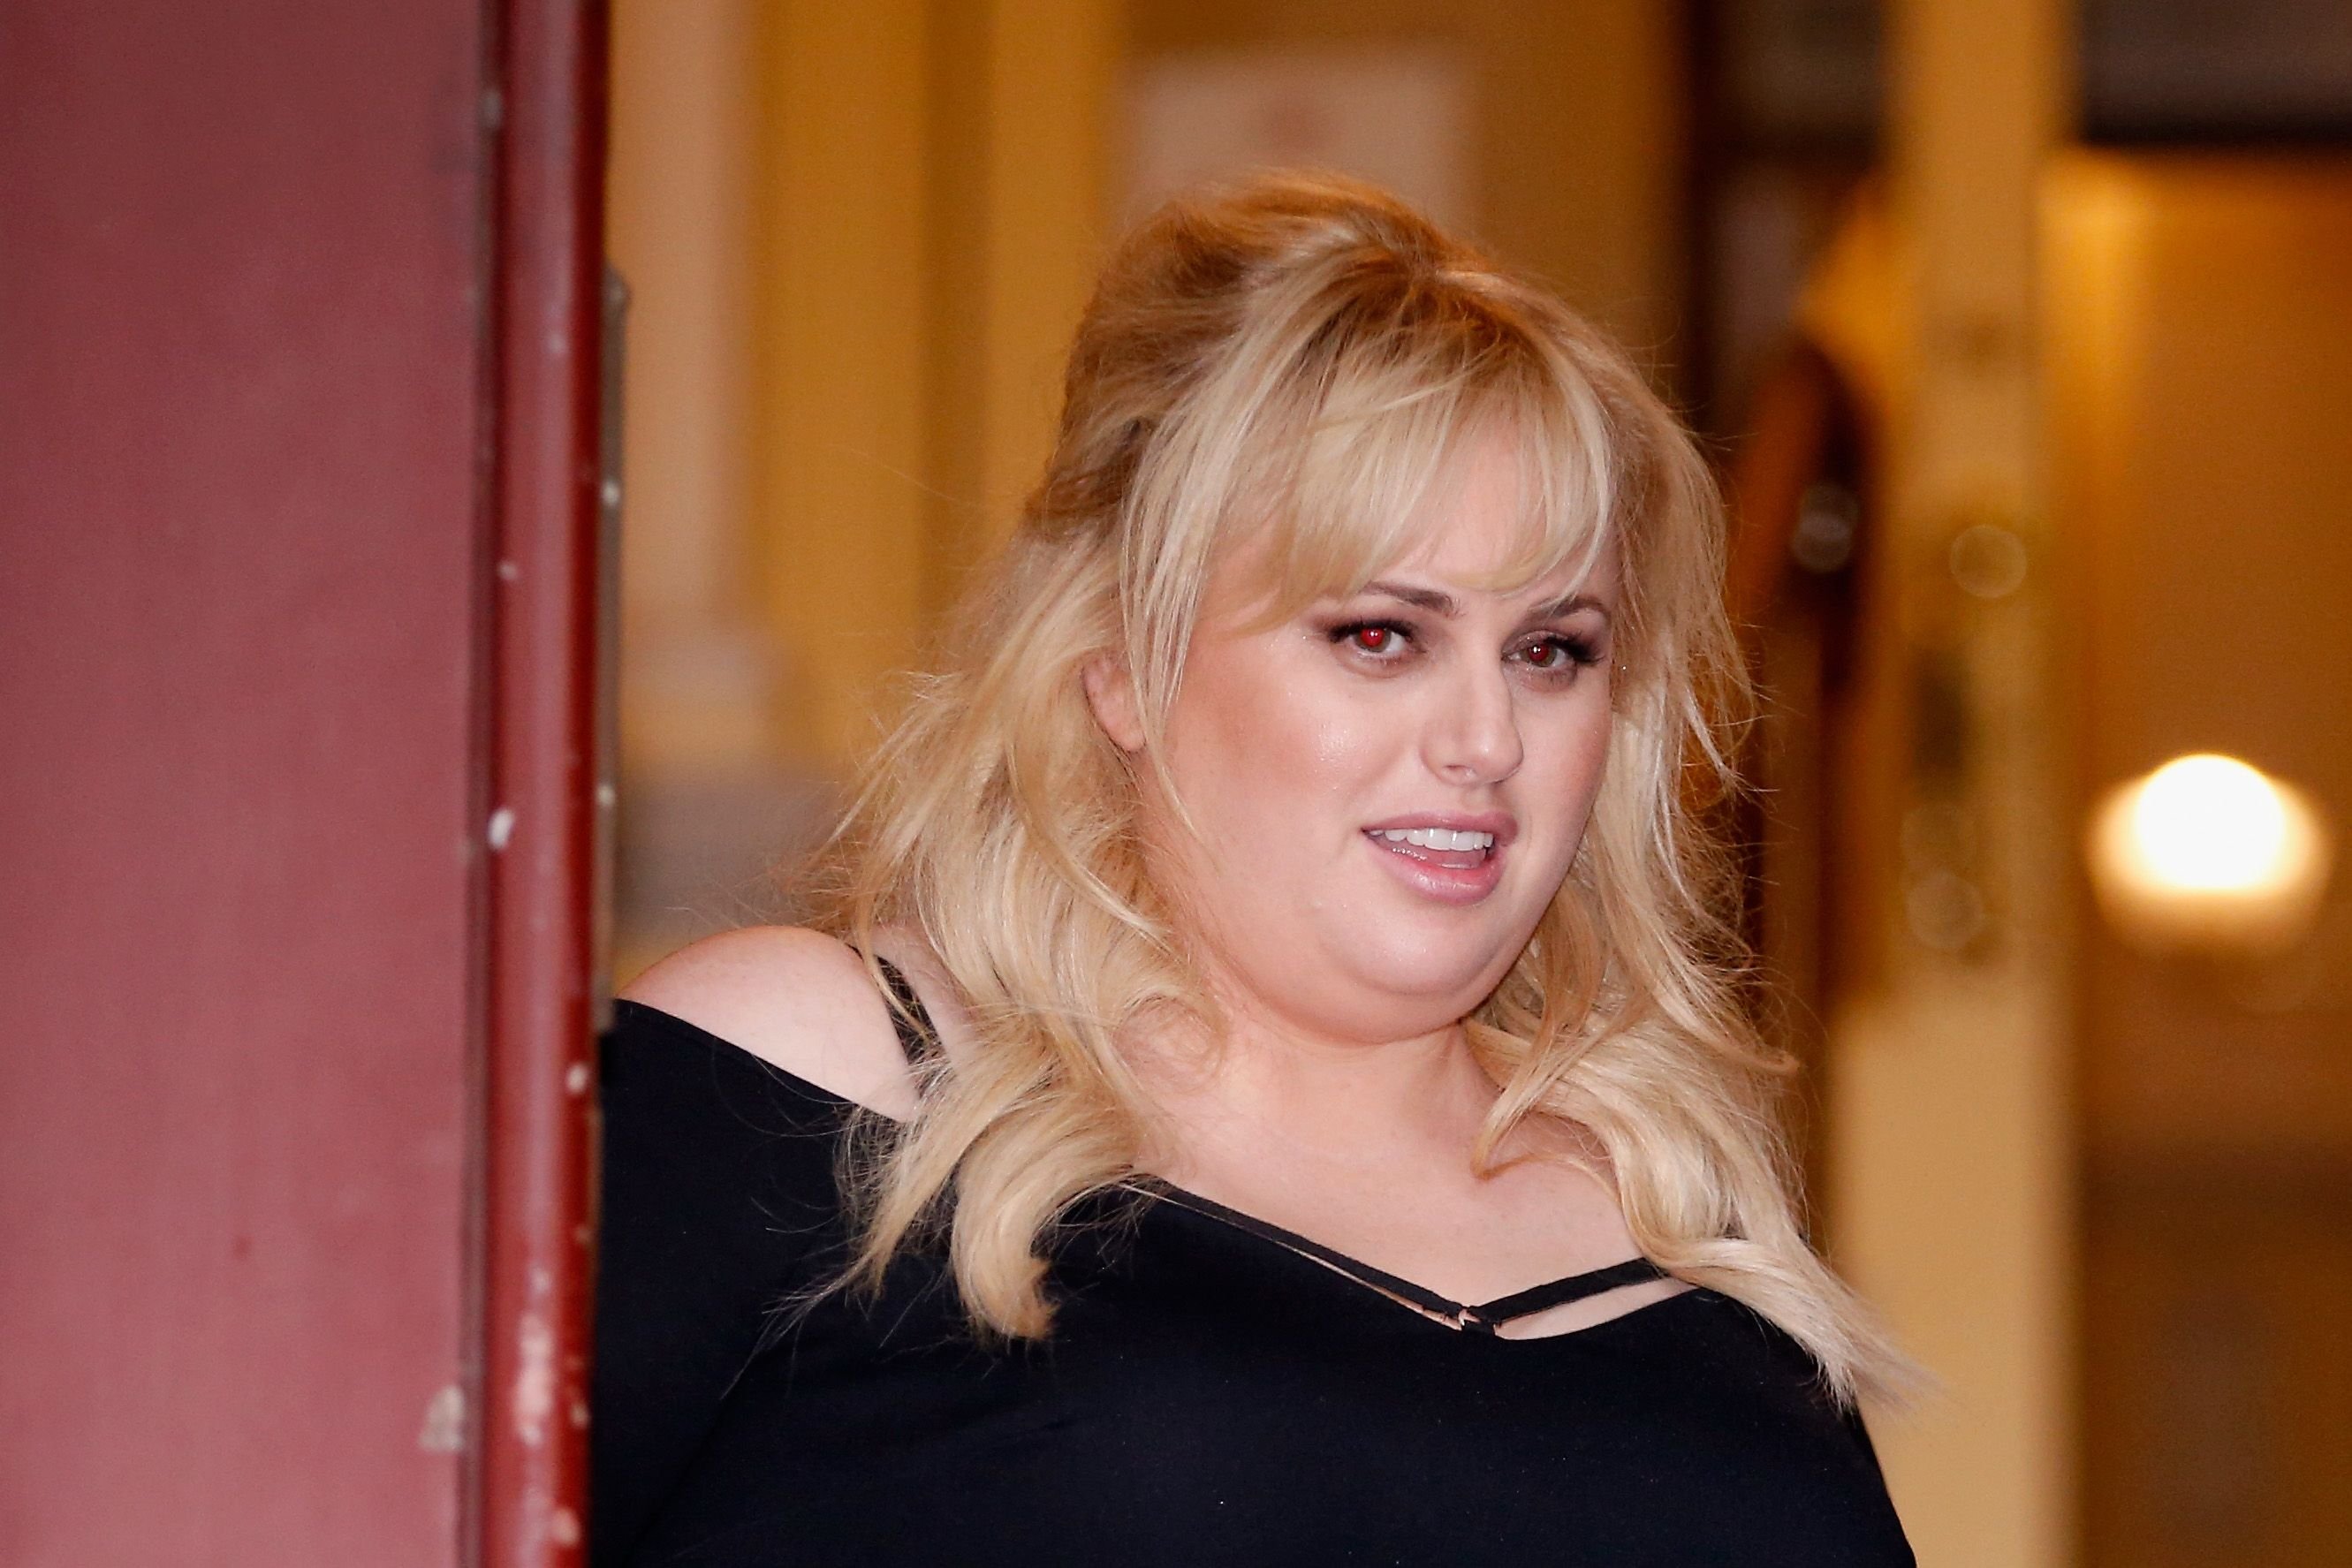 Rebel Wilson outside the Court of Appeal on April 19, 2018 in Melbourne, Australia. | Source: Getty Images